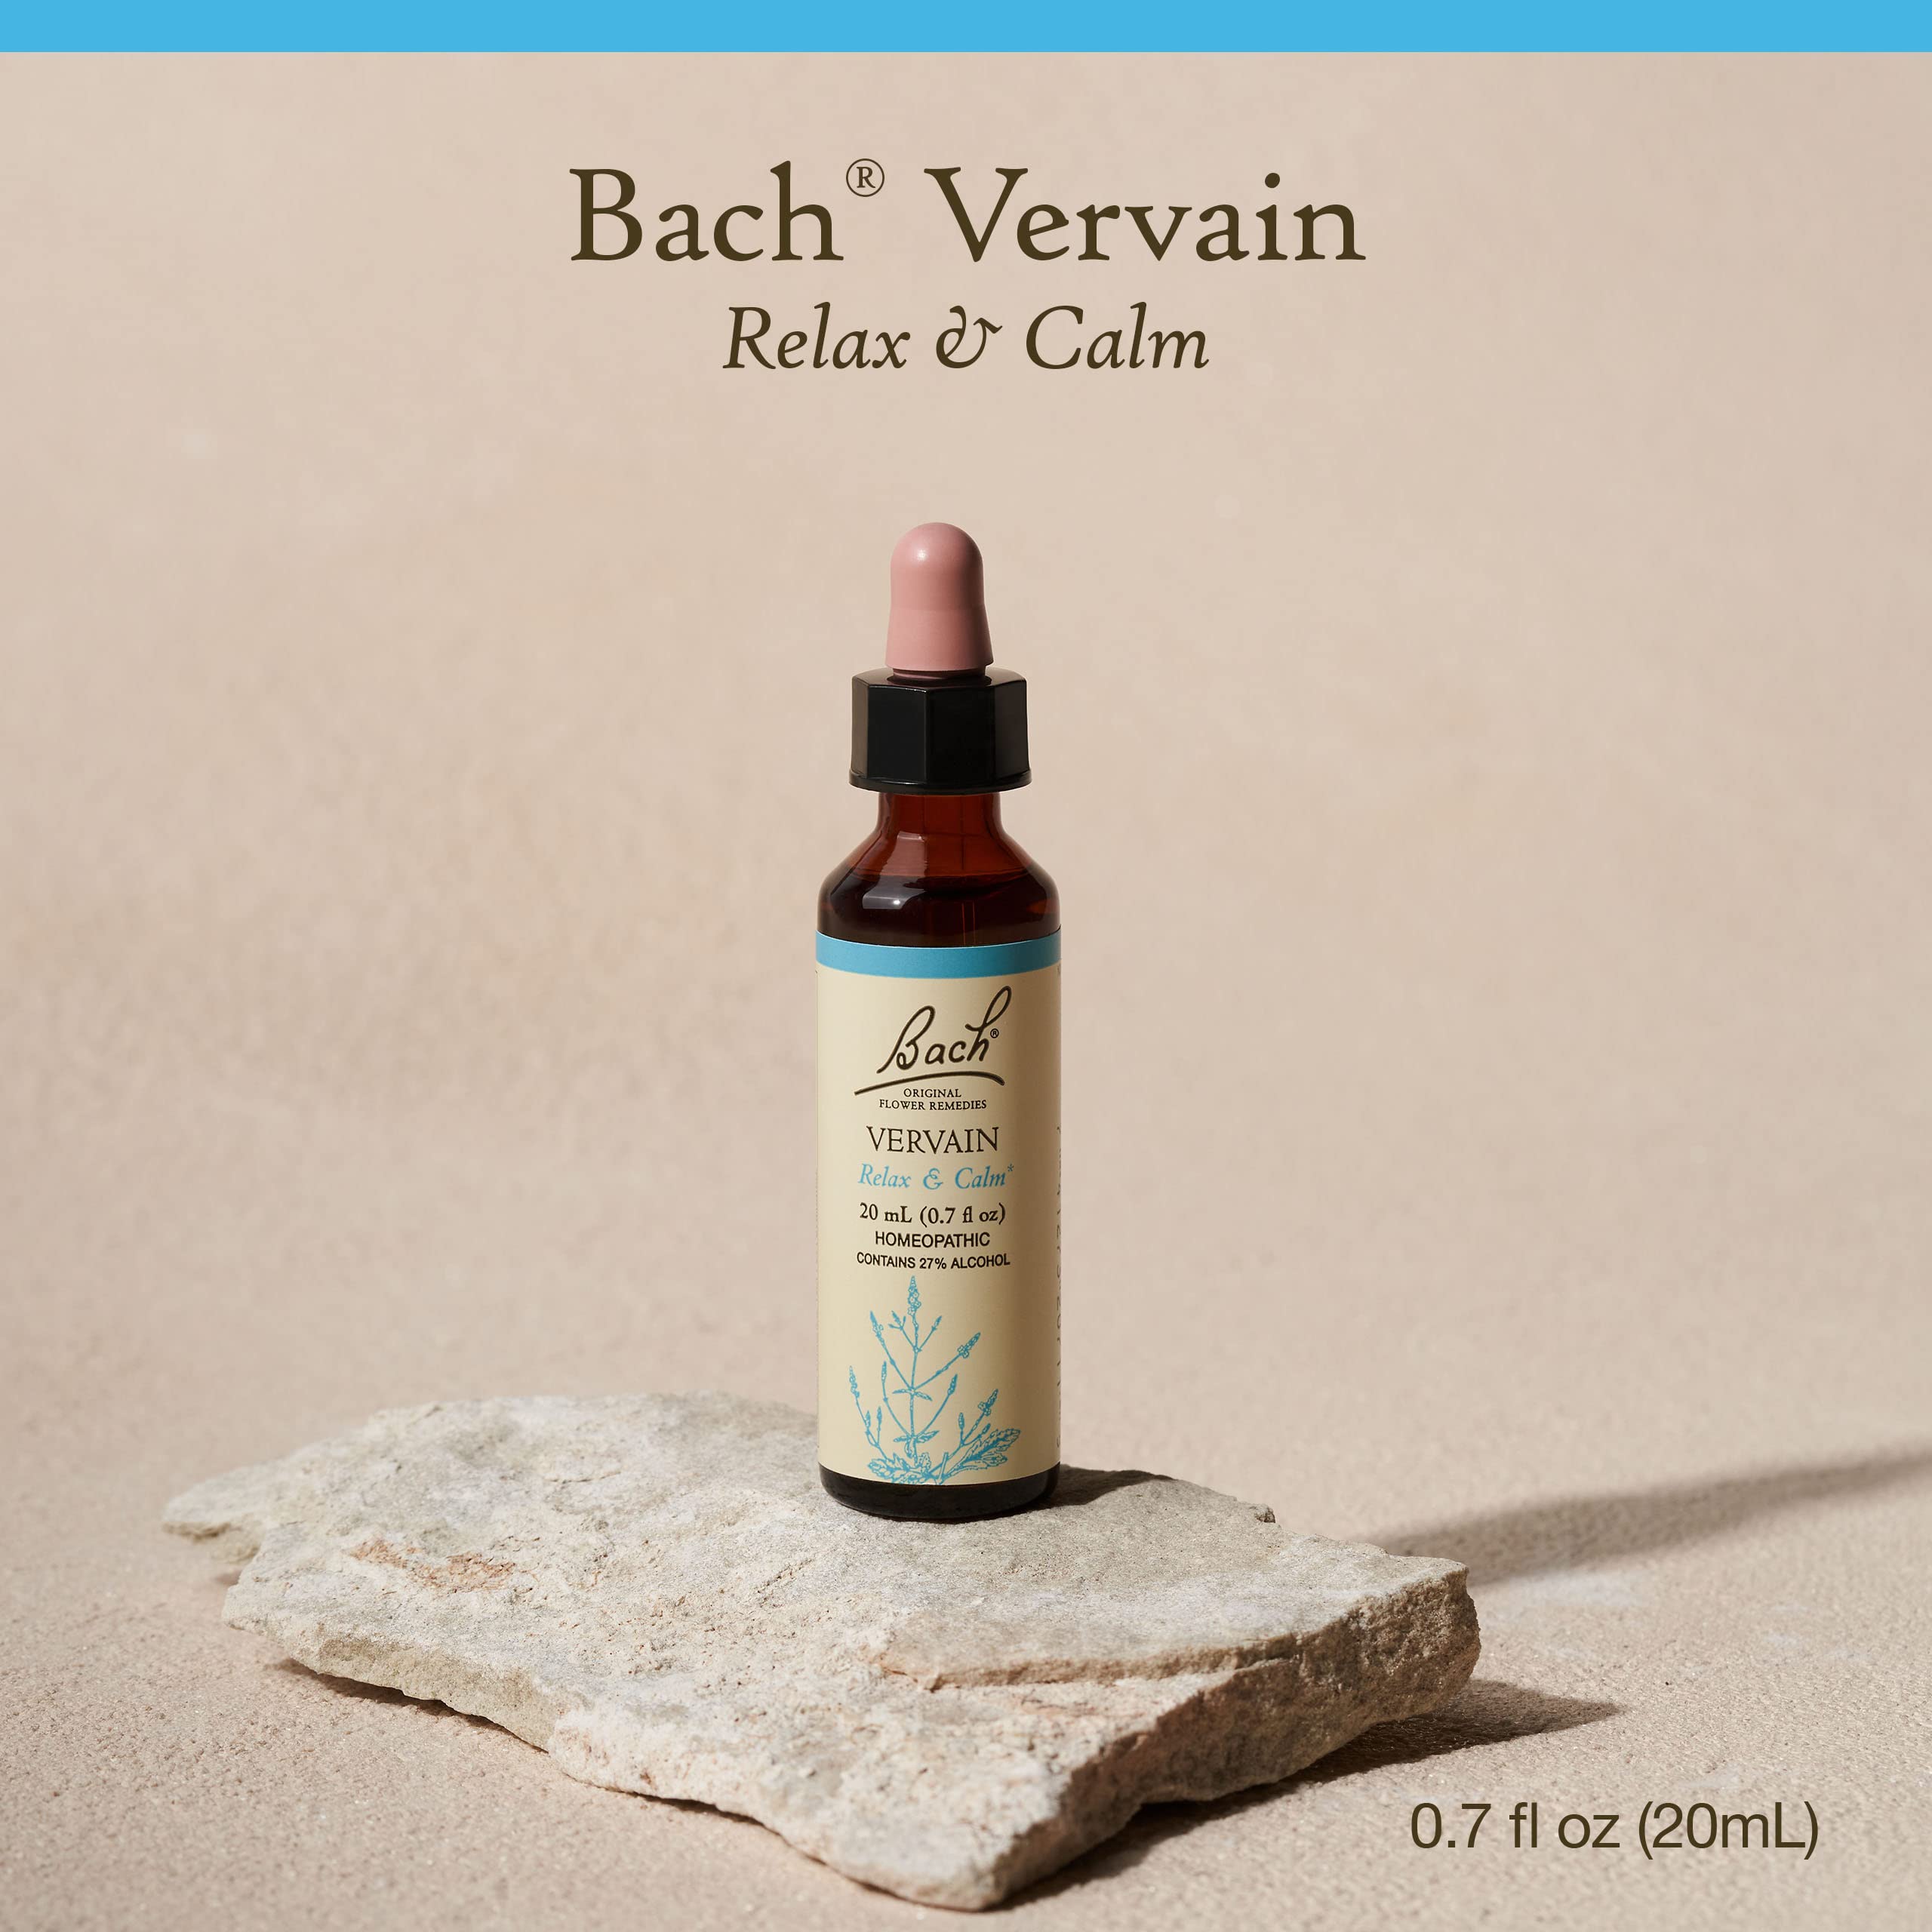 Bach Original Flower Remedies, Vervain for Relaxation and Calm, Natural Homeopathic Flower Essence, Holistic Wellness, Vegan, 20mL Dropper